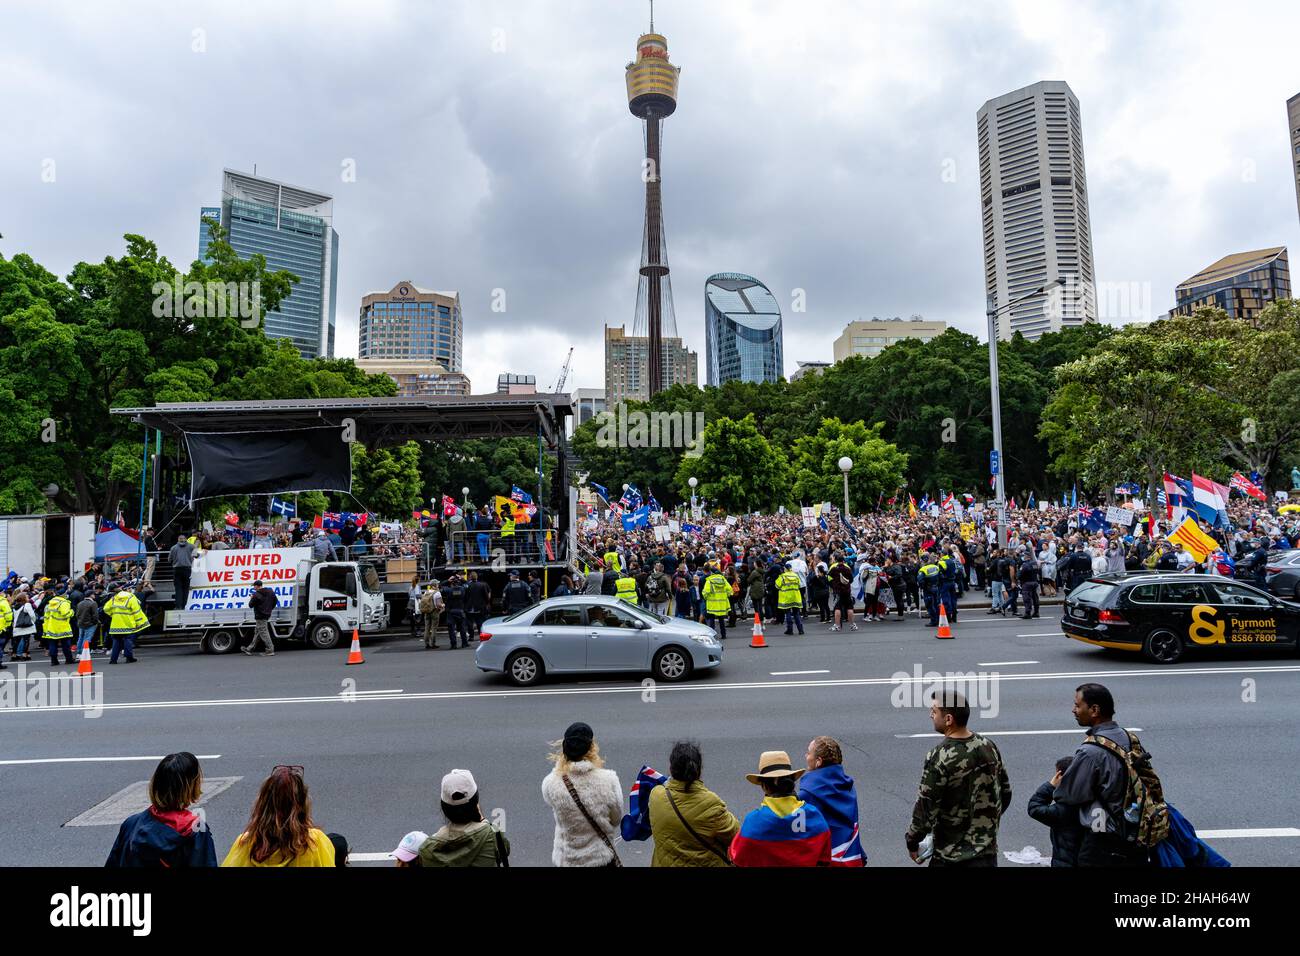 Large crowd of protesters against No Jab No Job policy of Australian government. In view are Sydney Eye Tower, buildings, road, cars and police force. Stock Photo